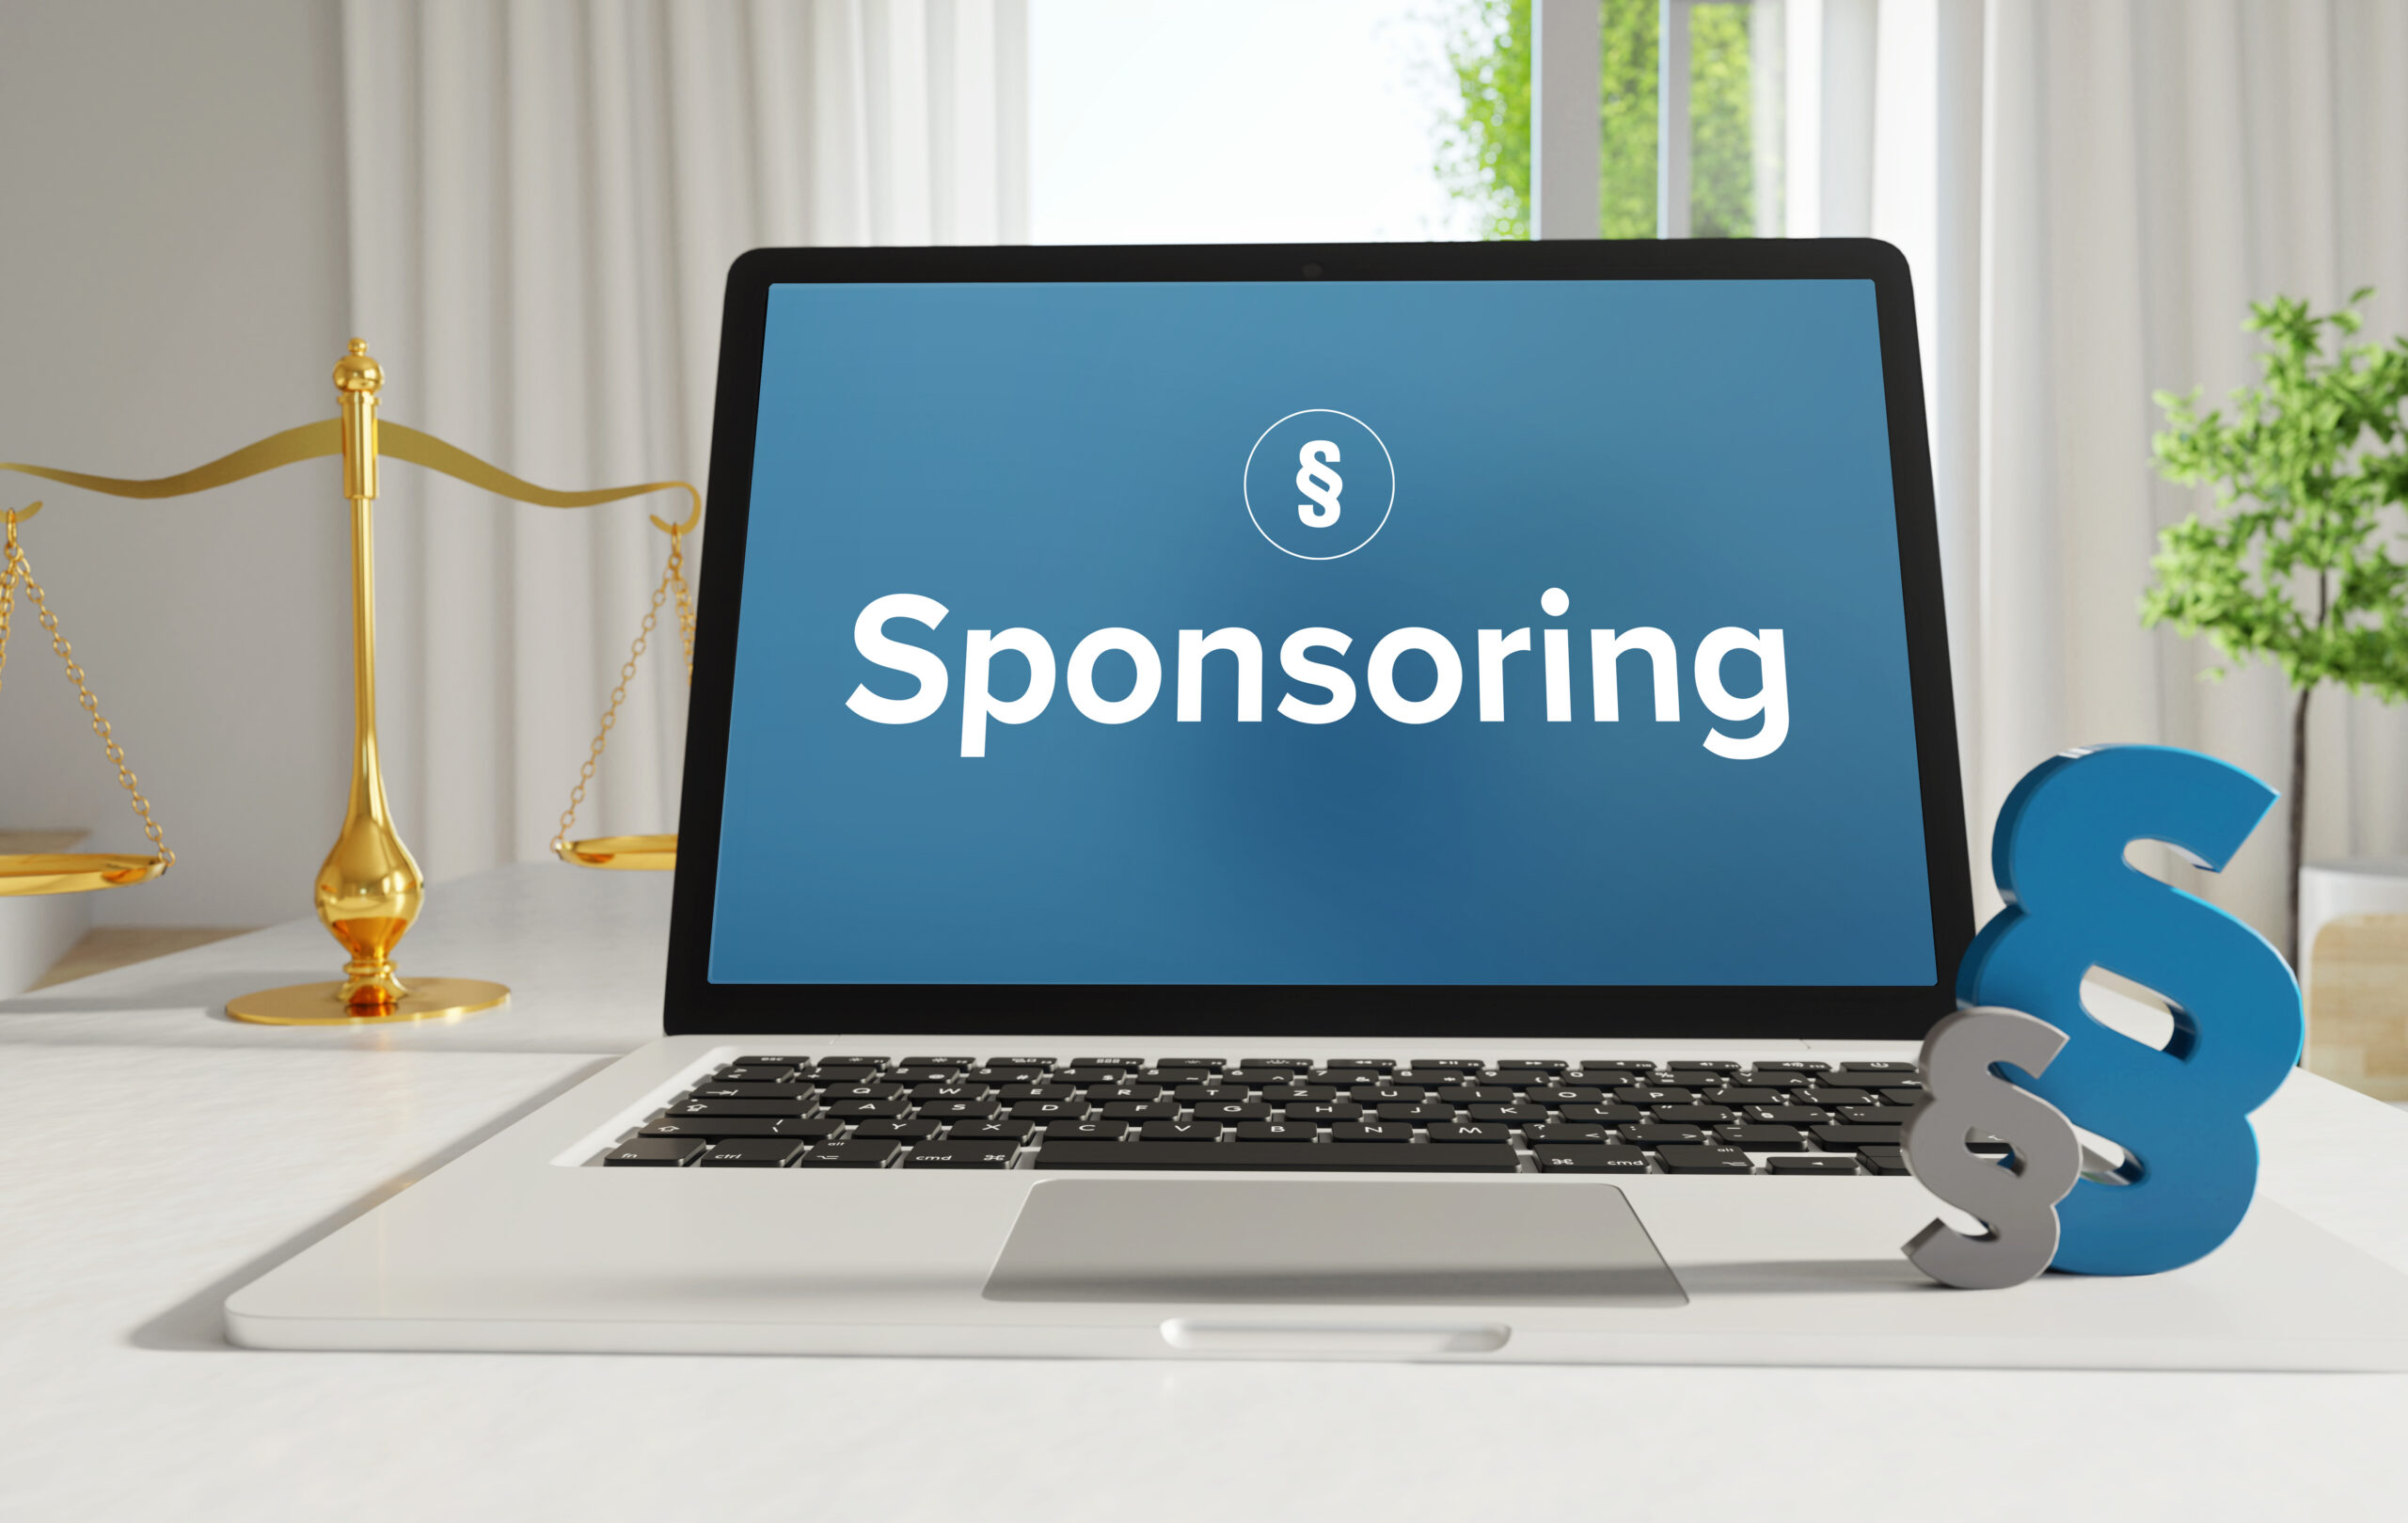 "Sponsoring" on a laptop screen with the symbol for Sections against a white background